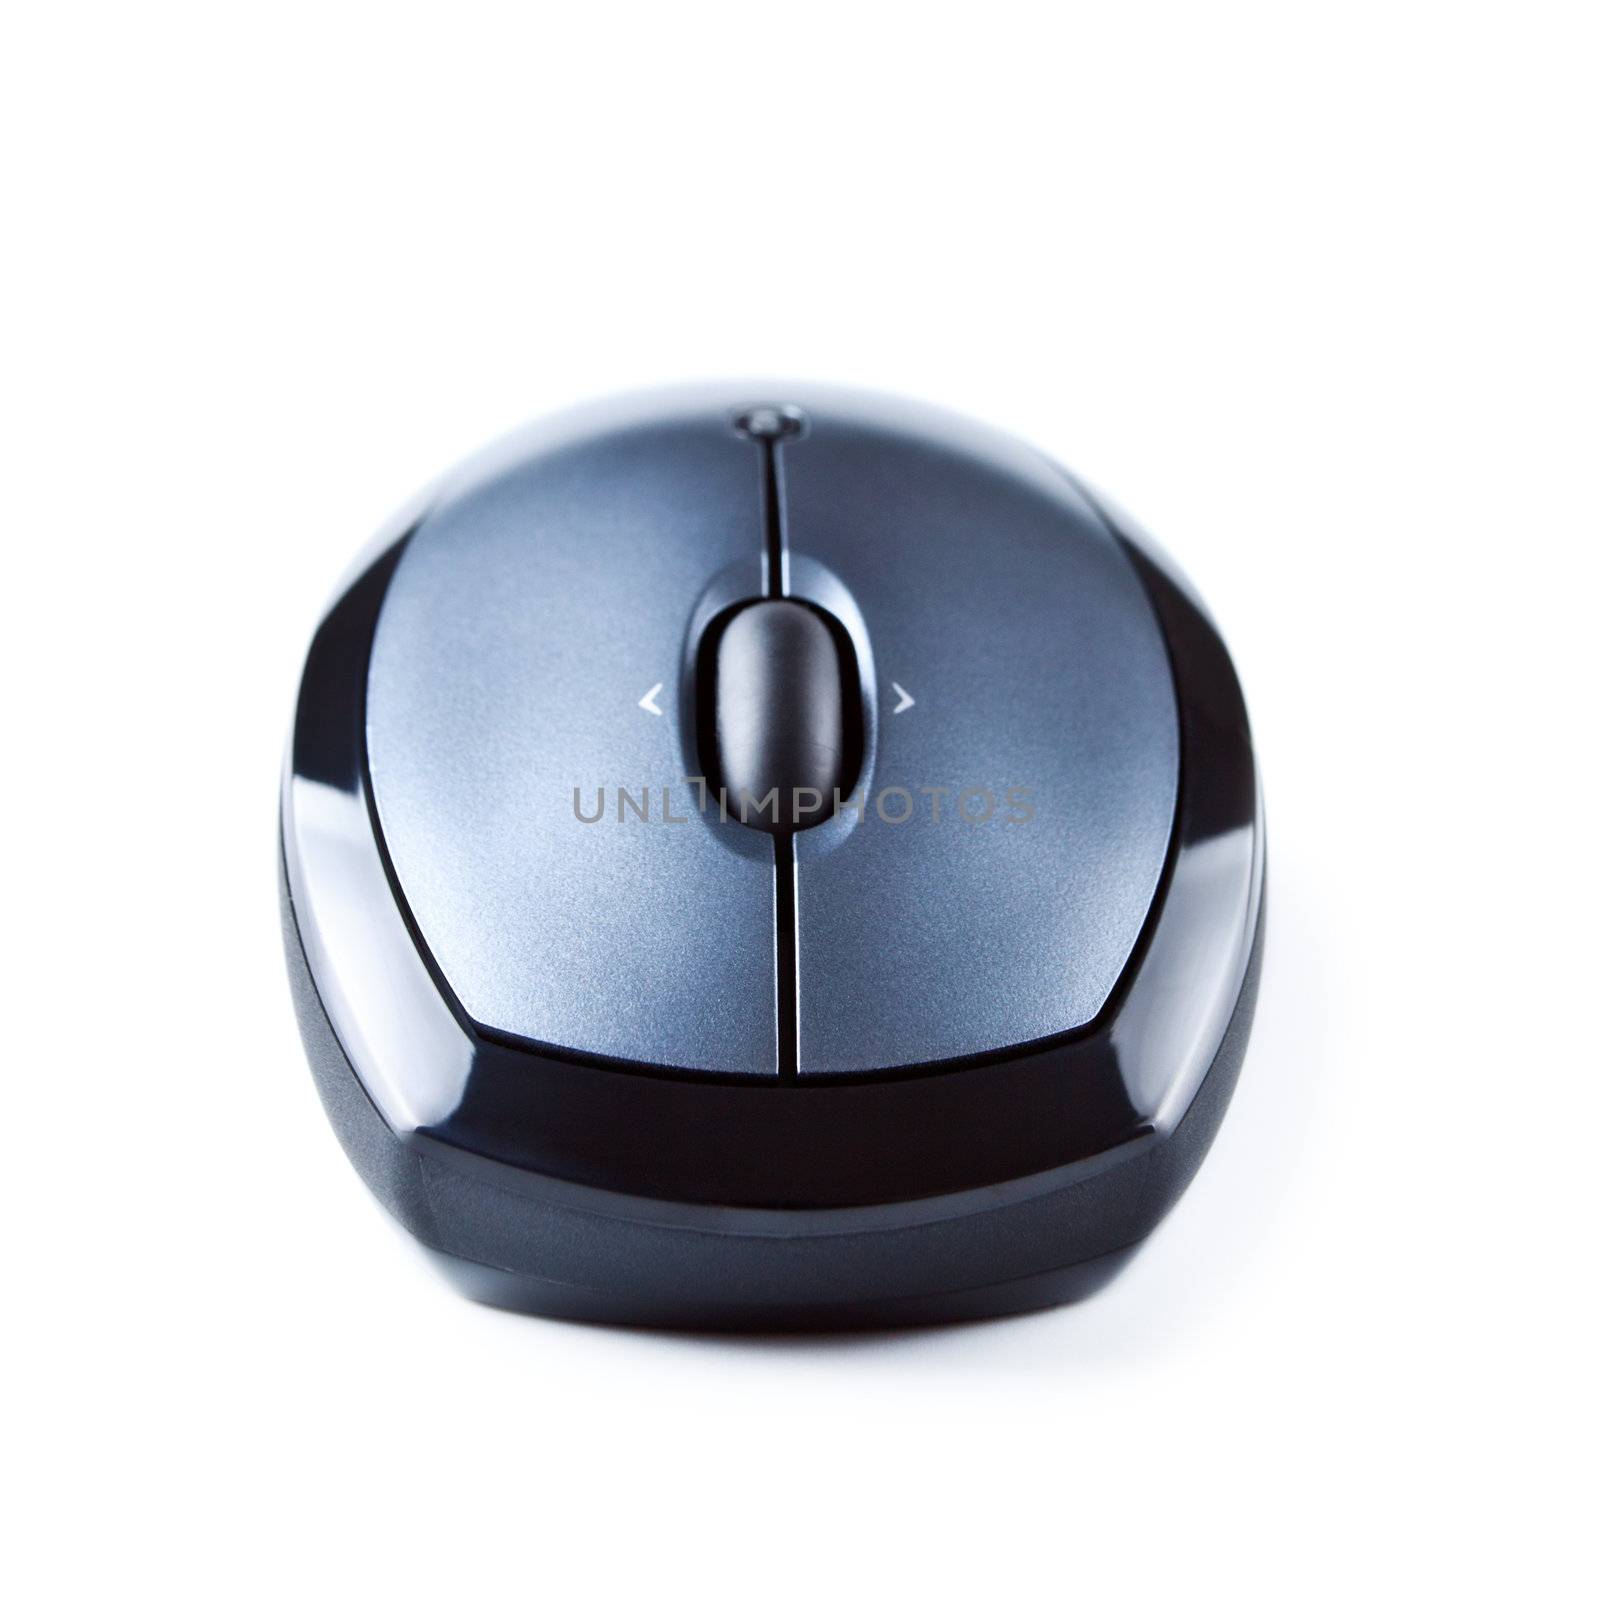 wireless computer mouse by petr_malyshev